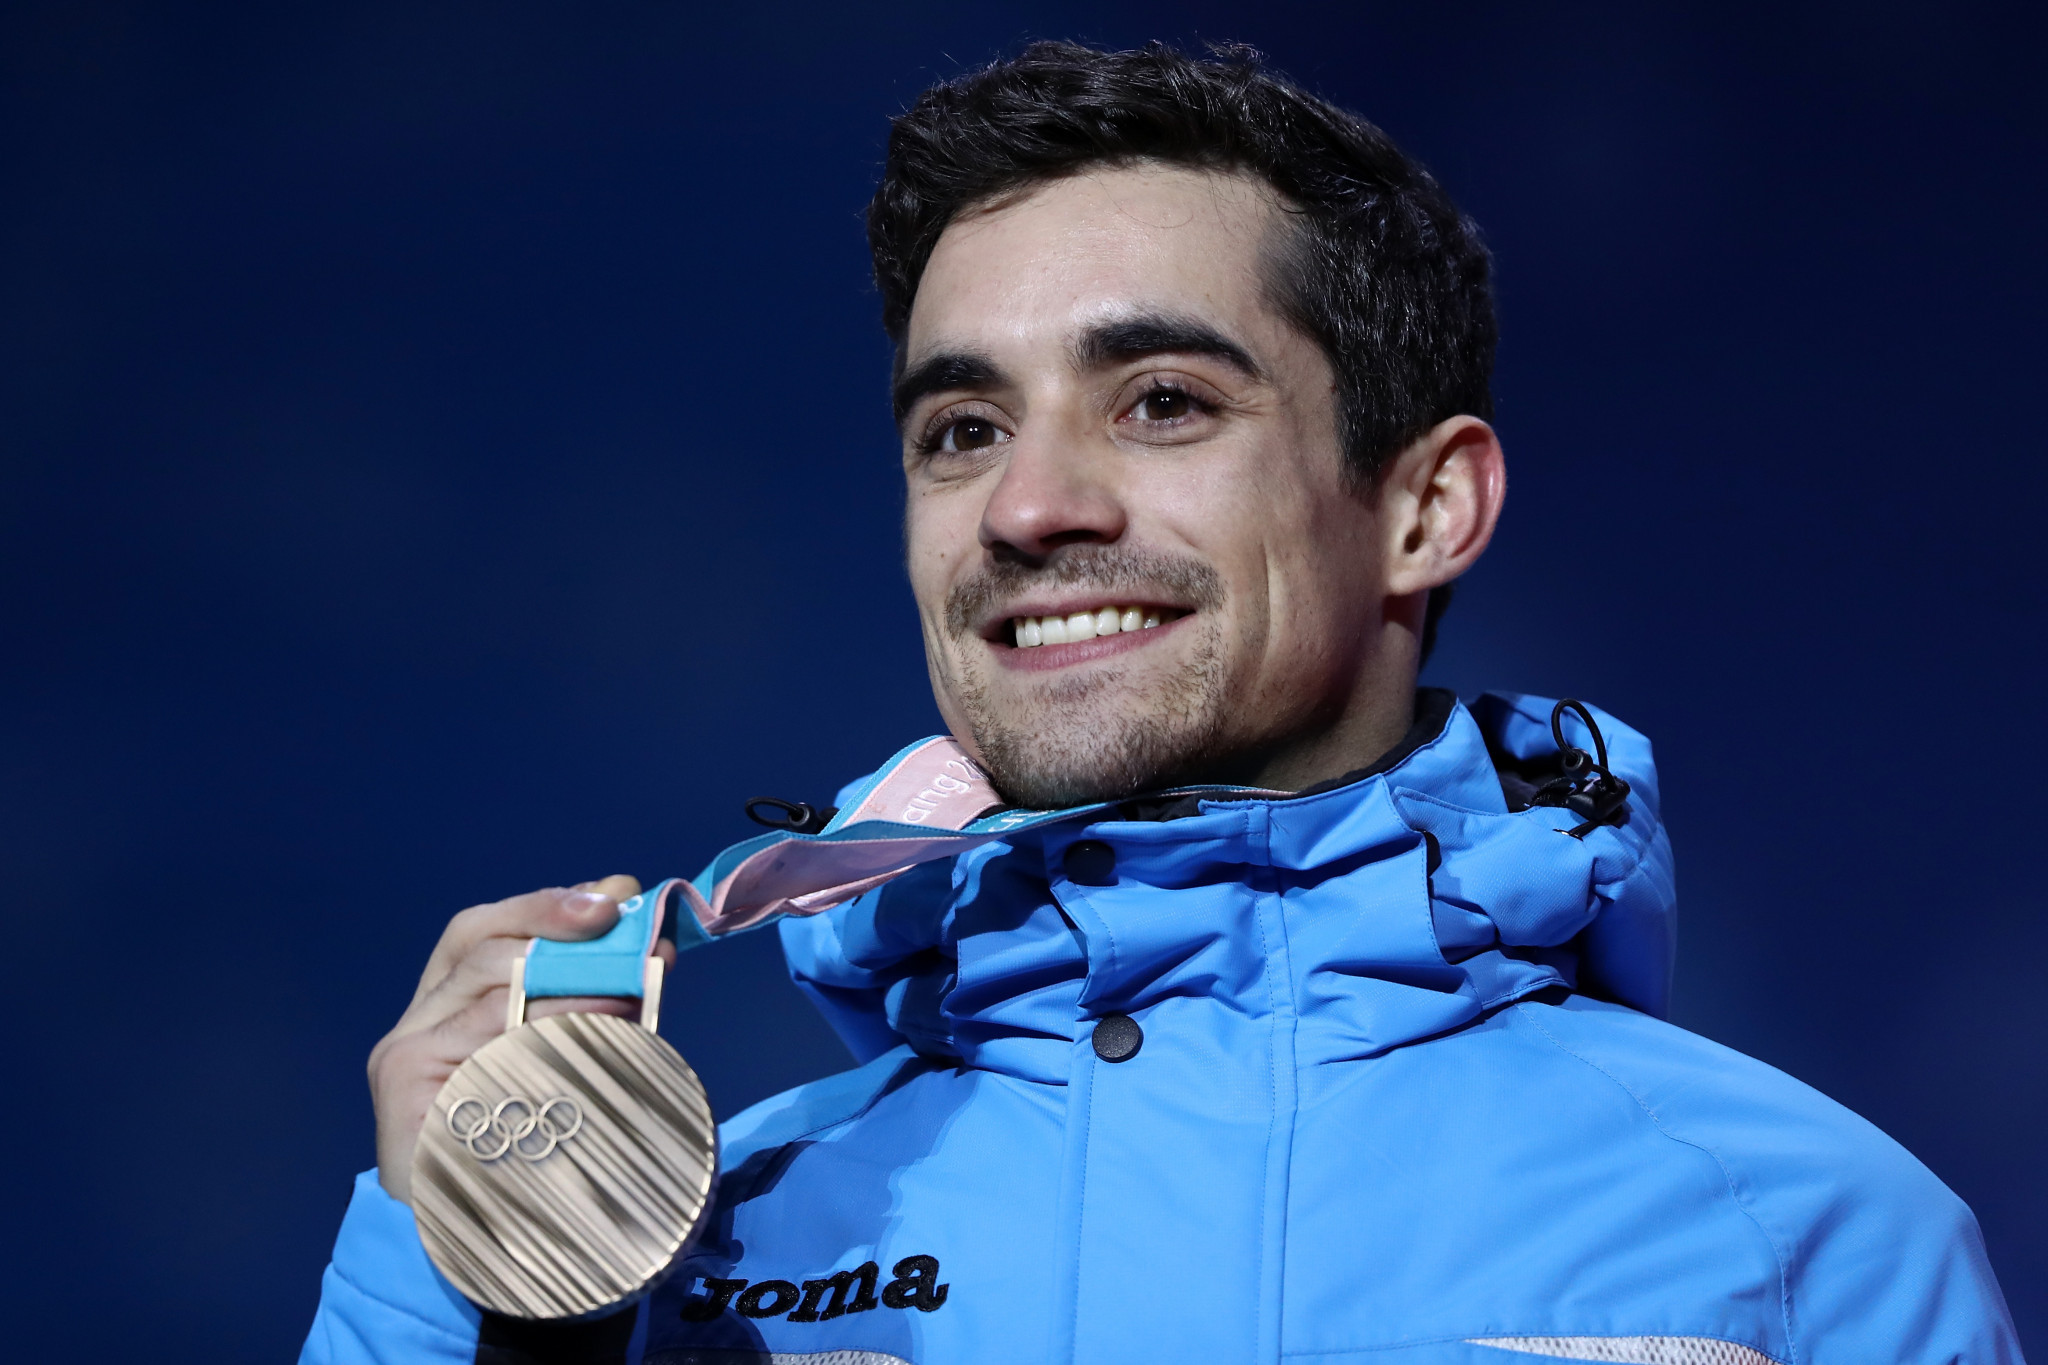 Javier Fernandez earned figure skating bronze at the Pyeongchang 2018 Winter Olympics ©Getty Images